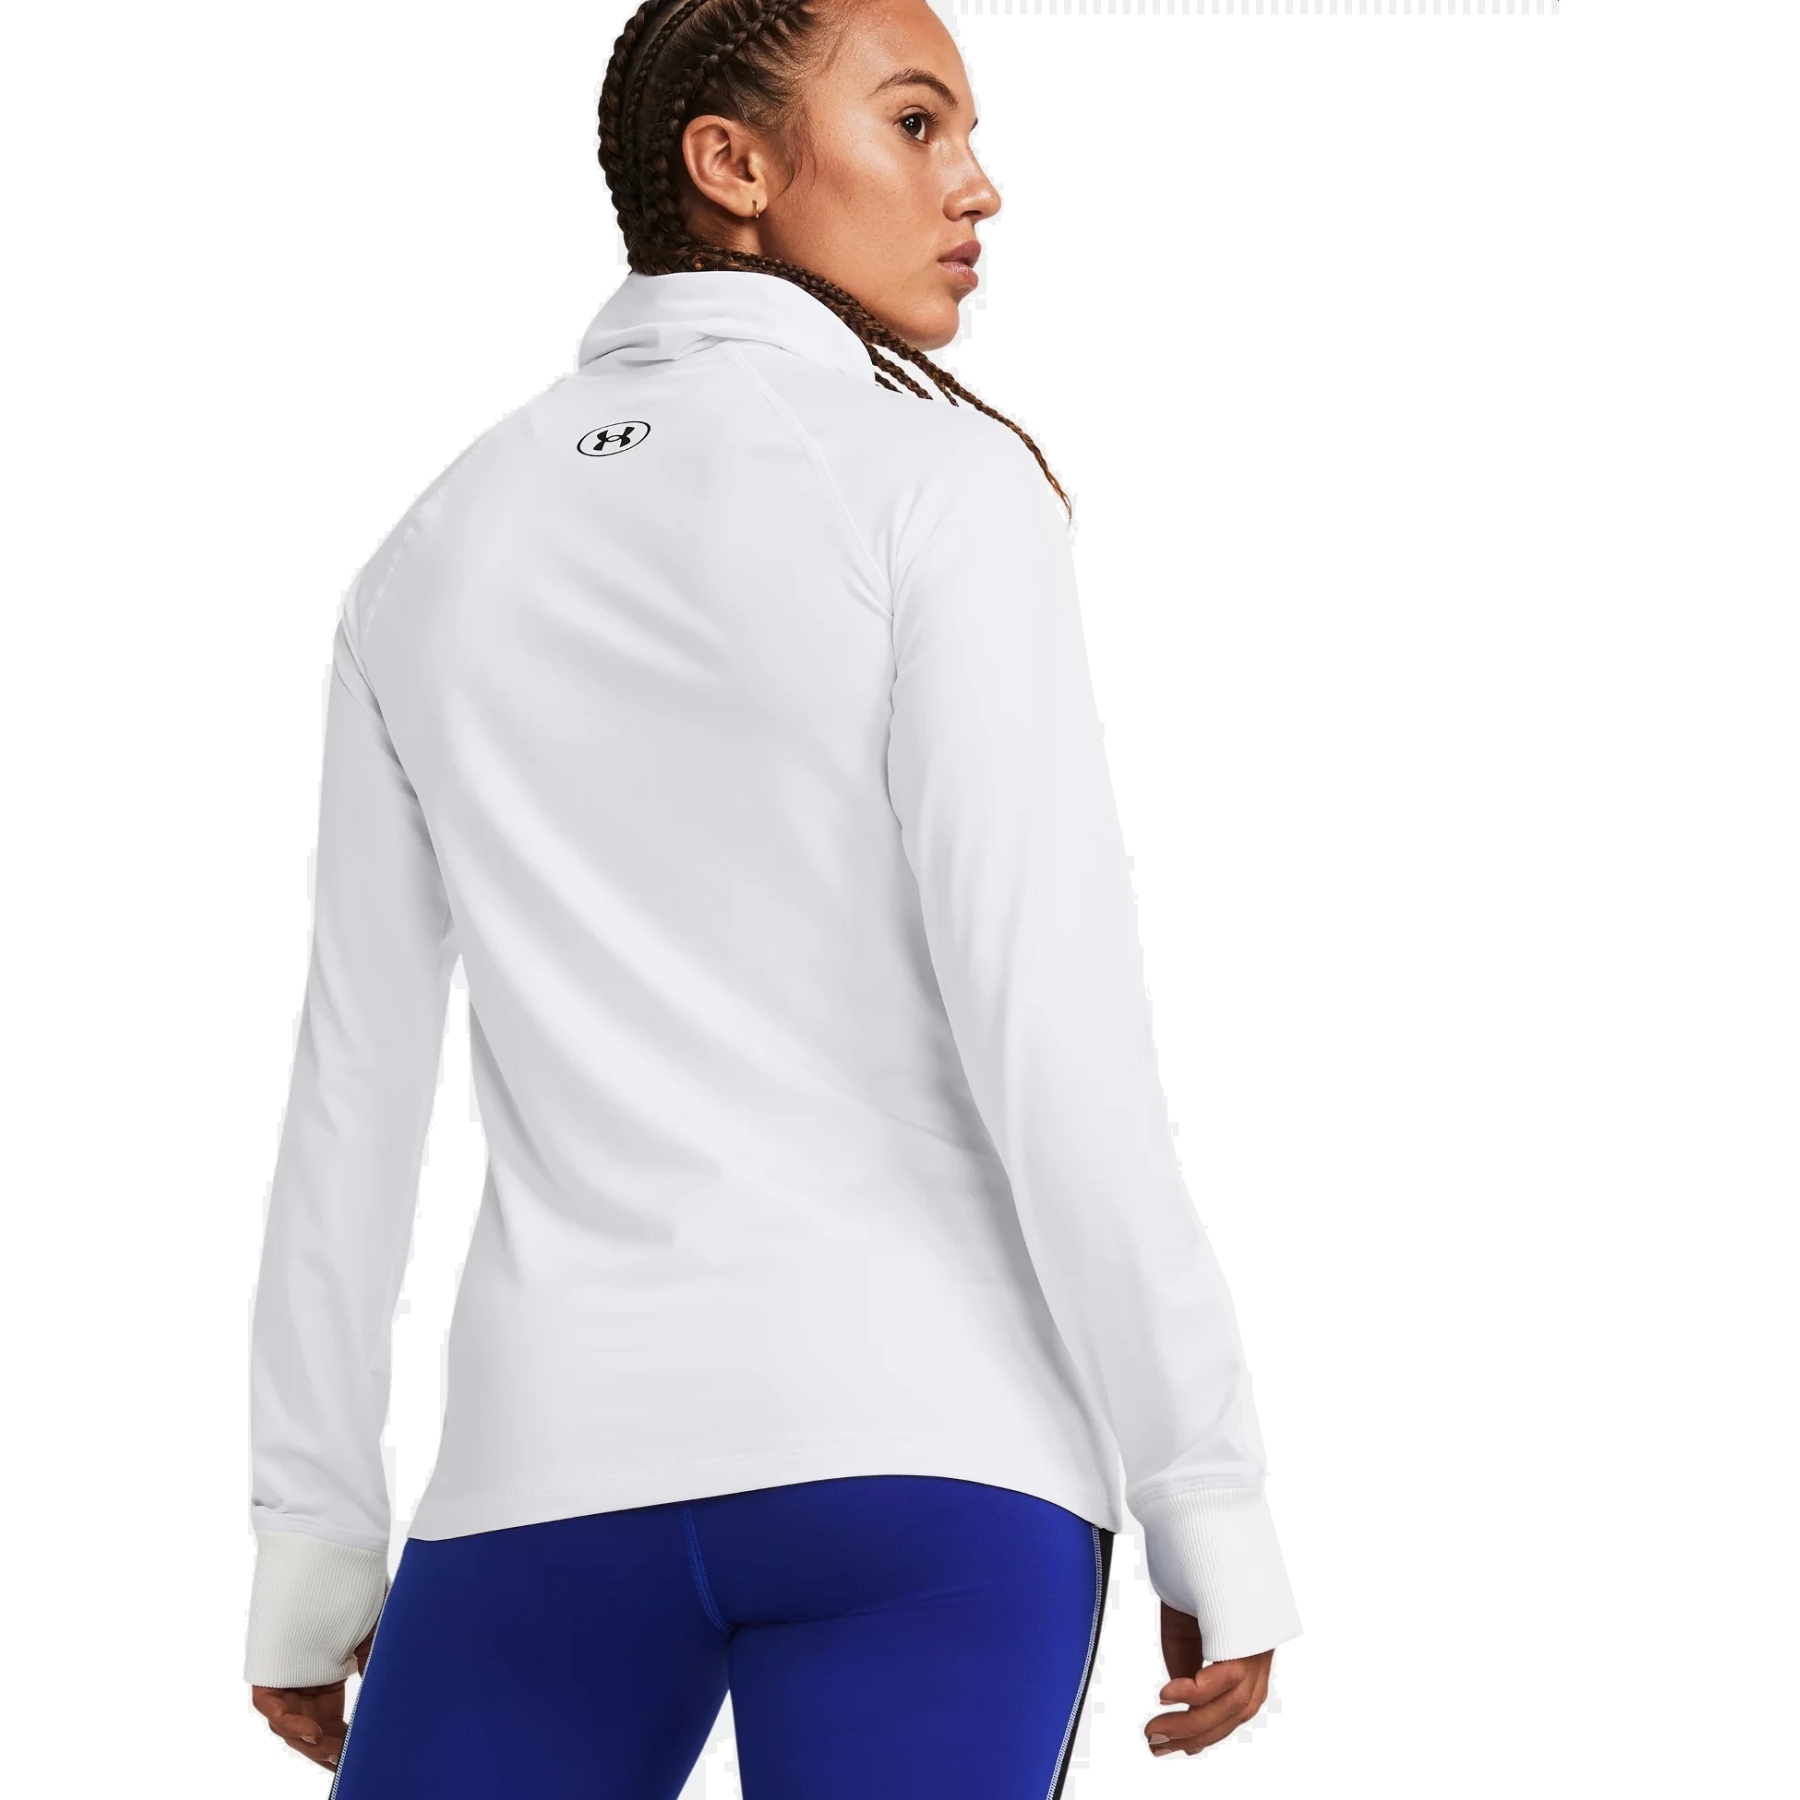 https://images.bike24.com/i/mb/db/77/a8/under-armour-womens-ua-train-cold-weather-funnel-neck-long-sleeve-shirt-white-black-2-1561438.jpg